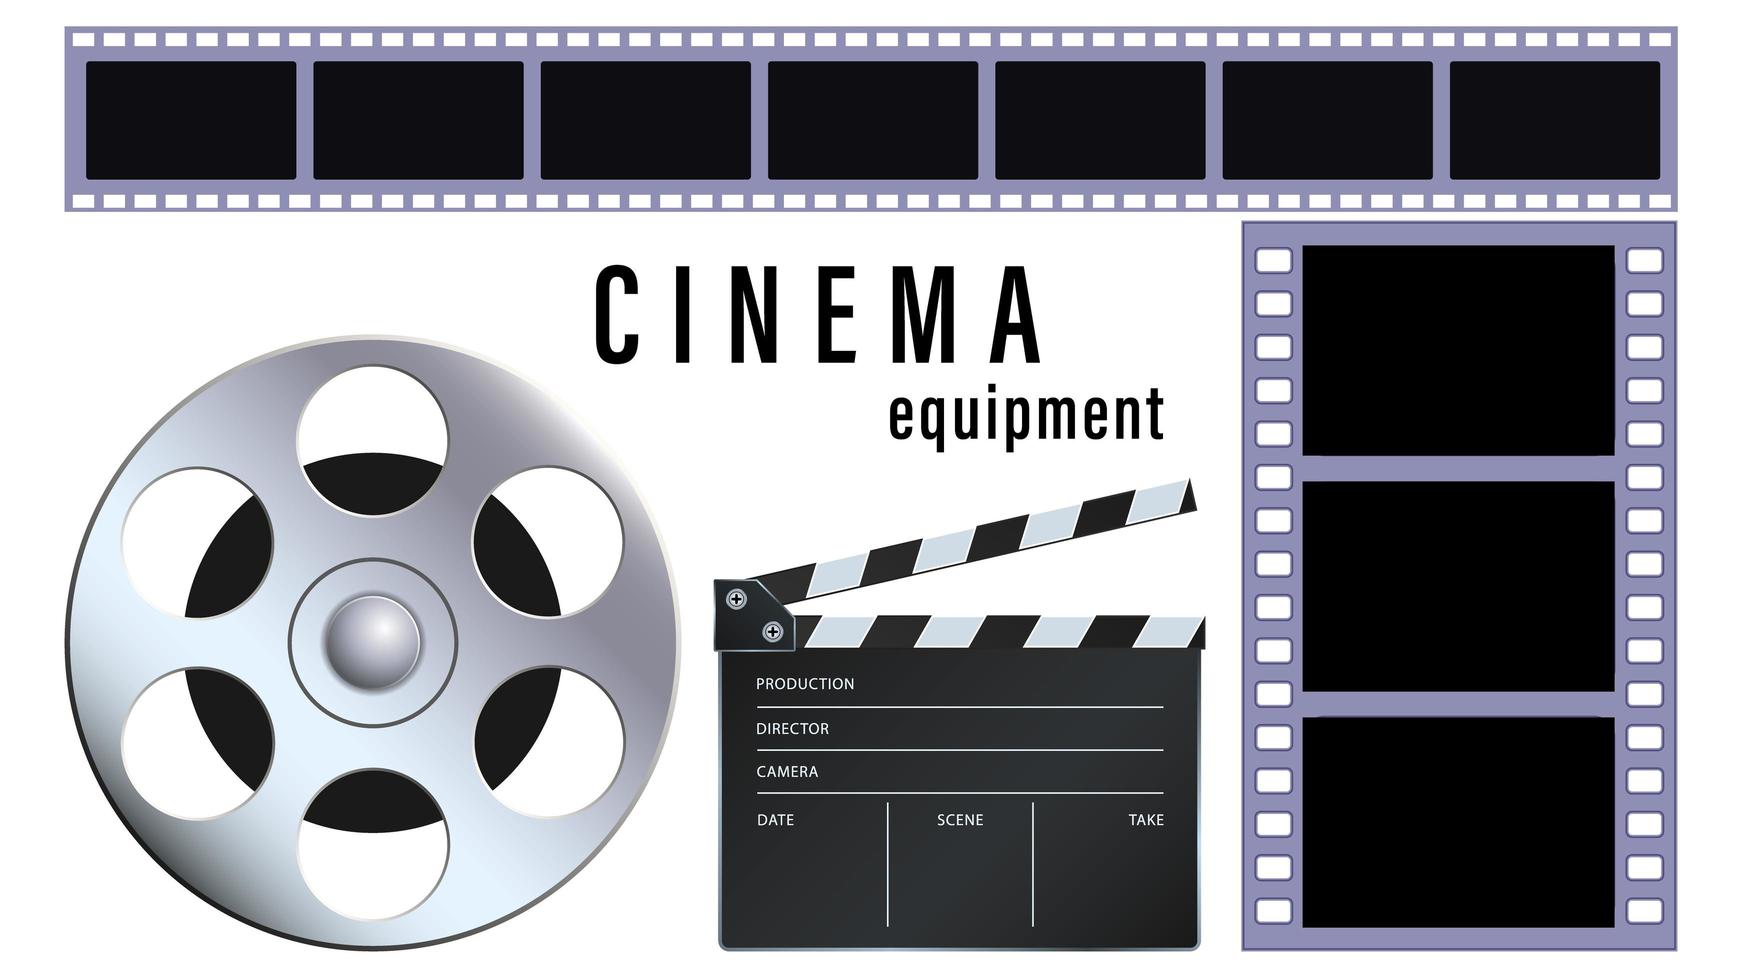 Realistic Cinema Equipment Isolated on a White Background vector